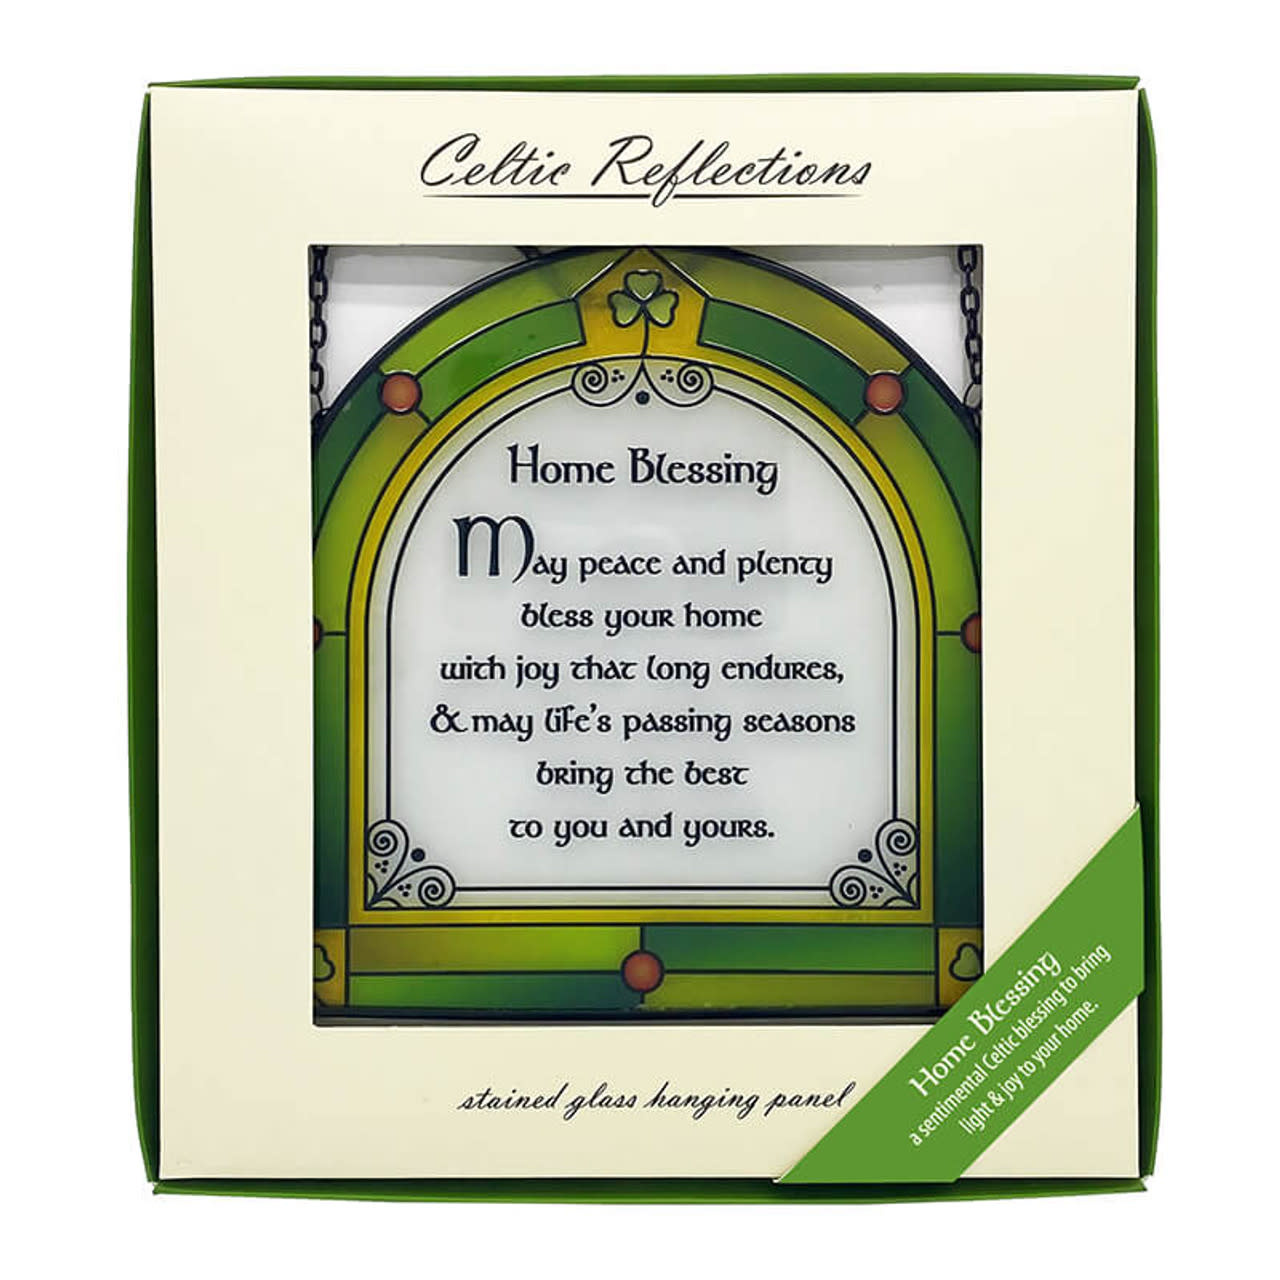 GARDEN CELTIC REFLECTIONS - Stained Glass Home Blessing